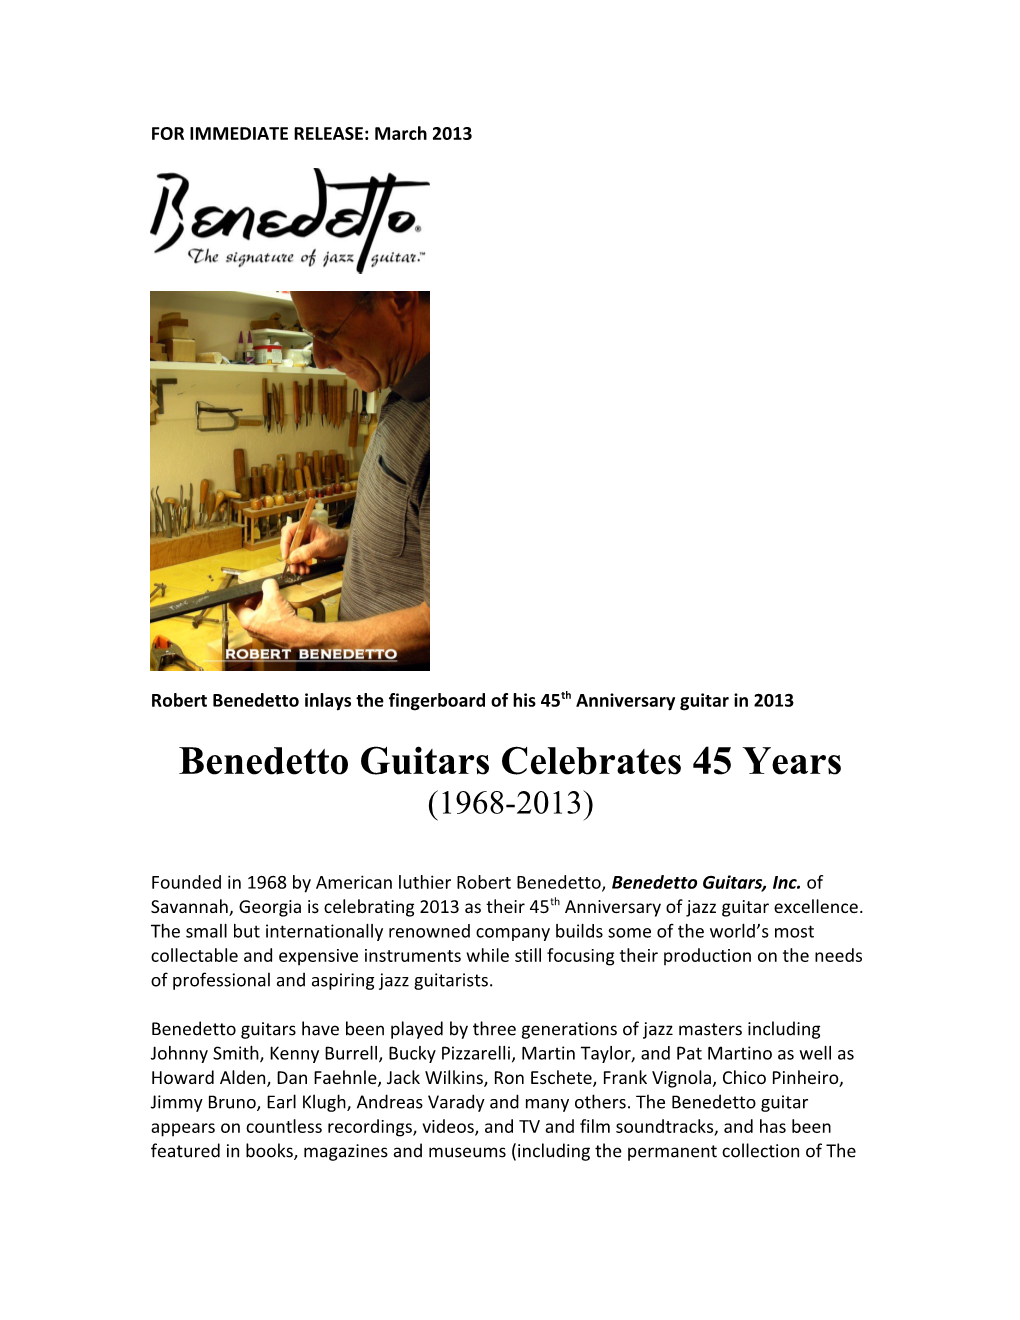 Robert Benedetto Inlays the Fingerboard of His 45Th Anniversary Guitar in 2013